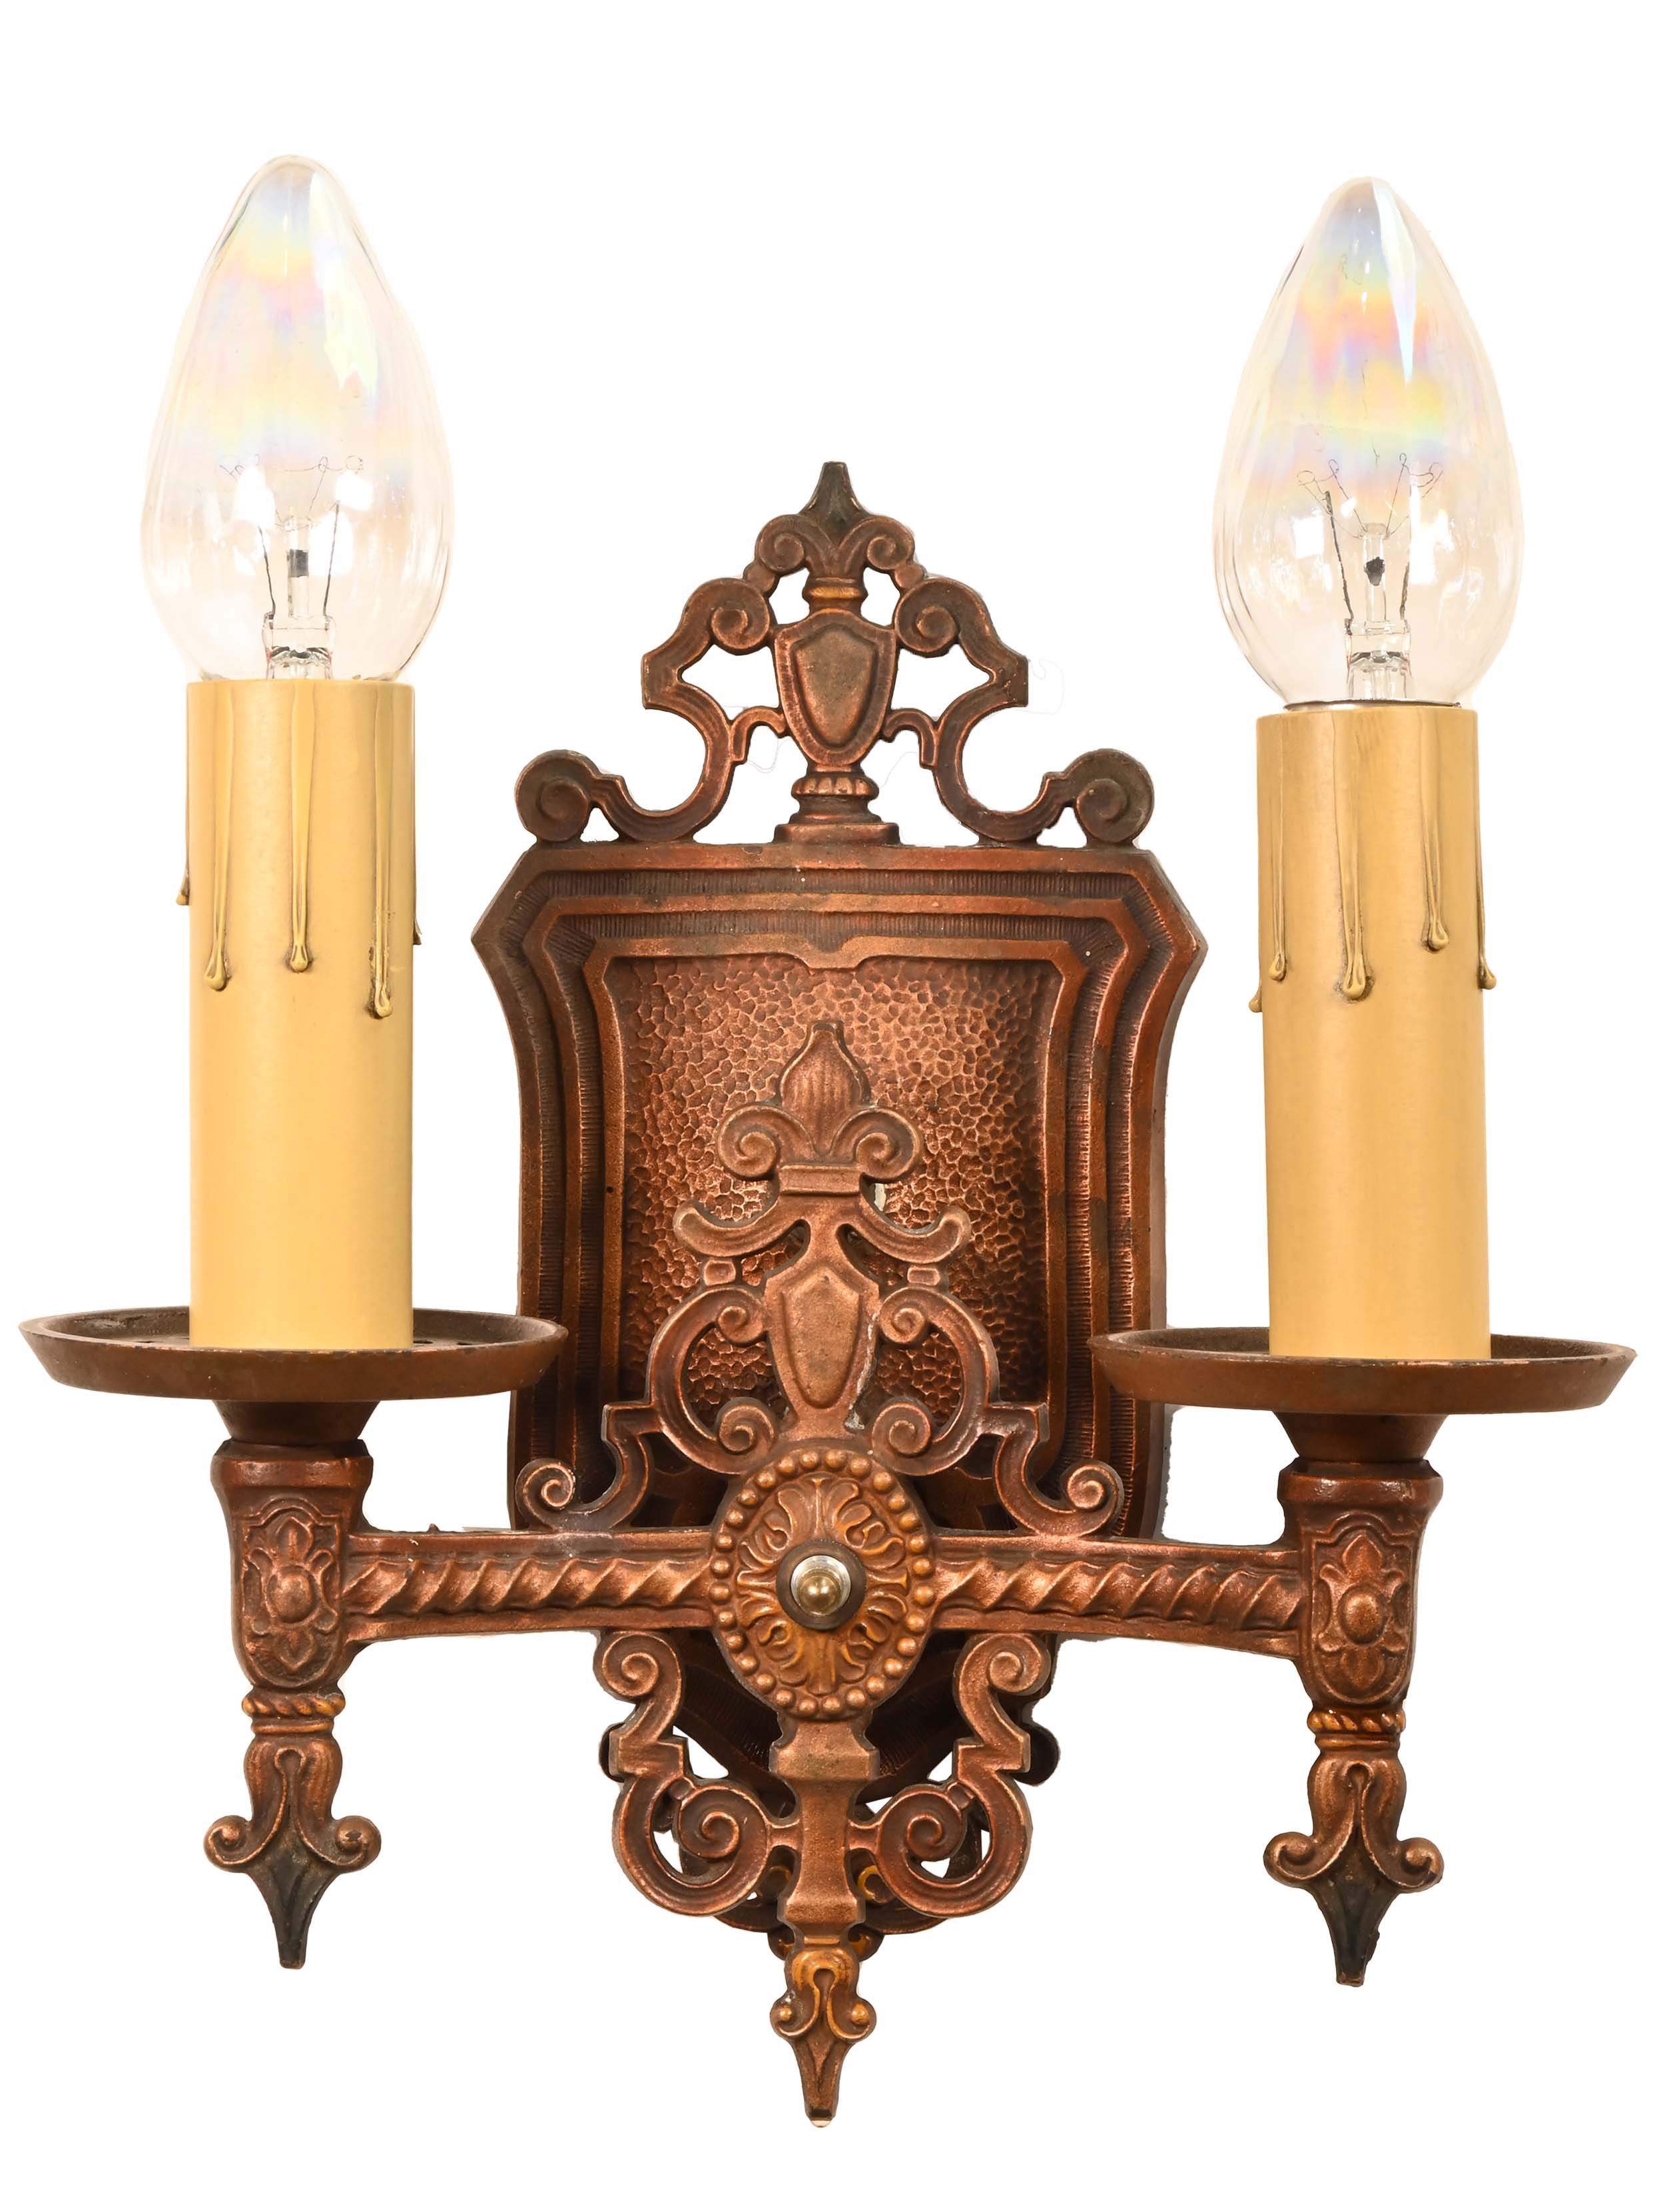 Textured Bronze Finish 31 H x 10 L 91512 31 H x 10 L Deco 79 Victorian-Style Metal and Glass Ornate Candle Sconce